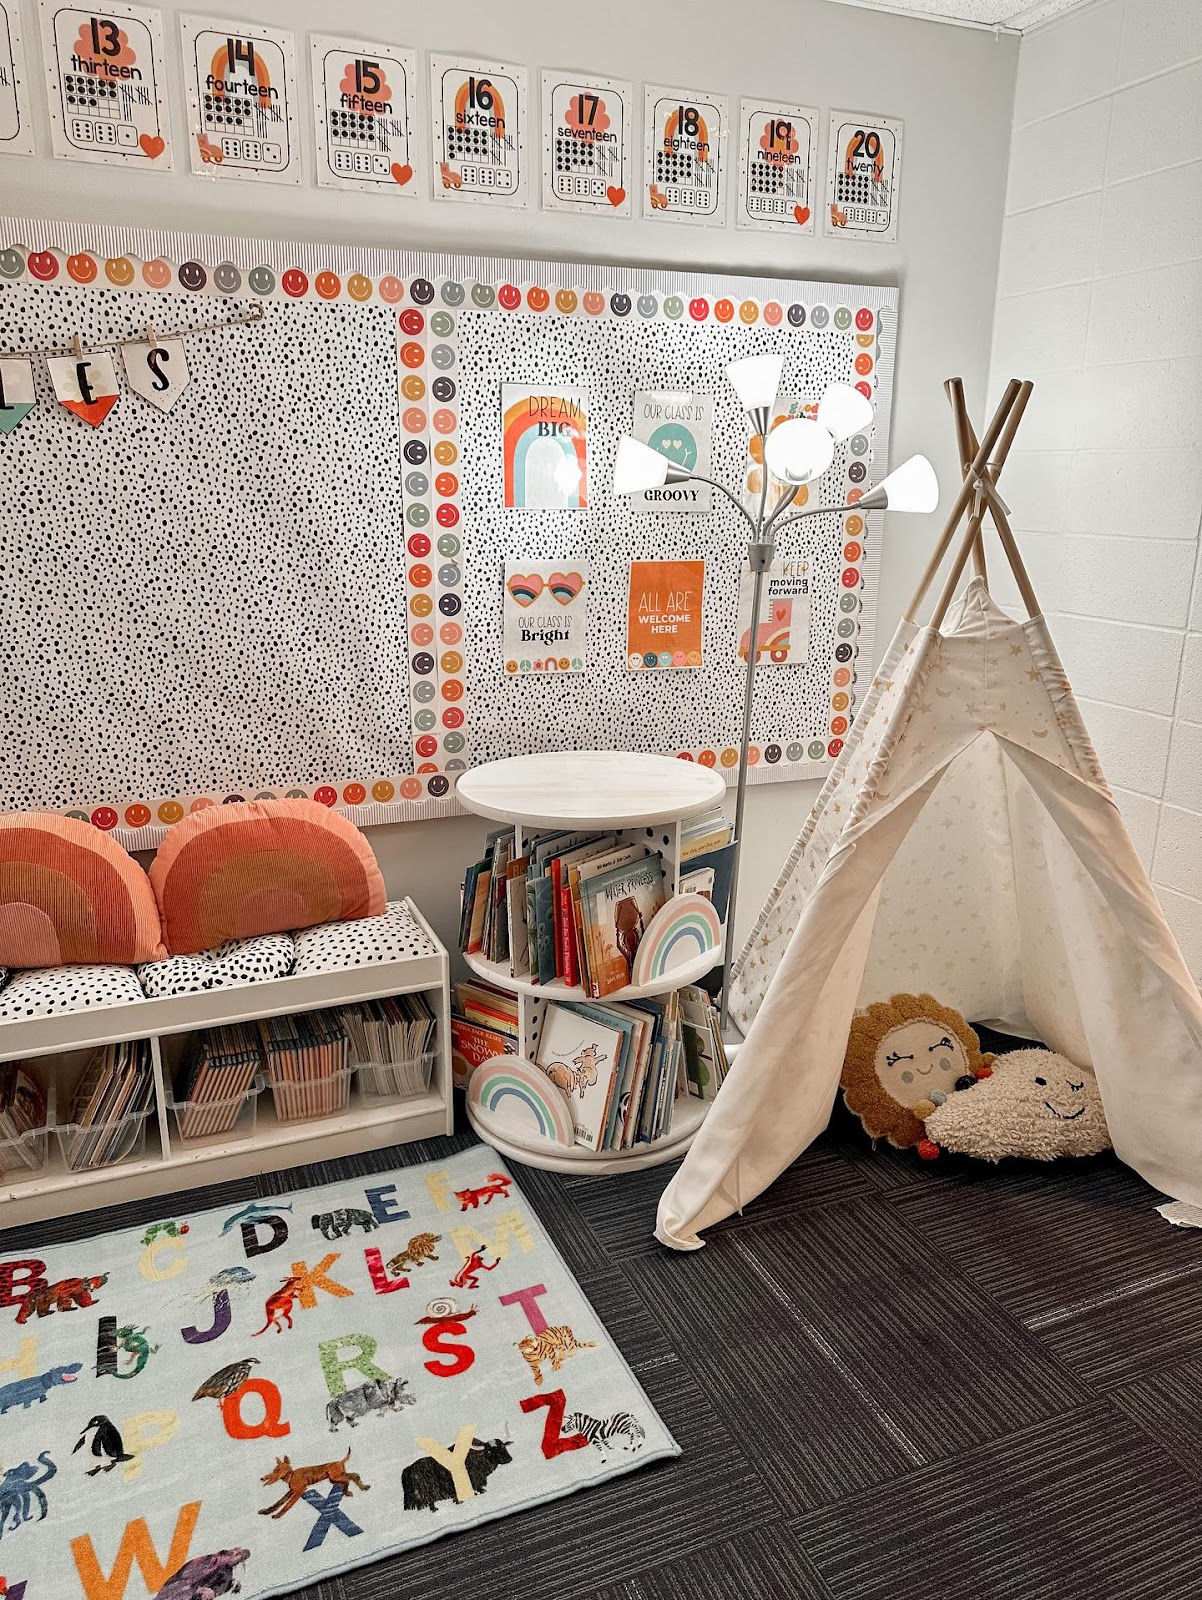 This image shows a cozy reading corner with a bench seat, buckets of books, and a tepee with pillows inside. 